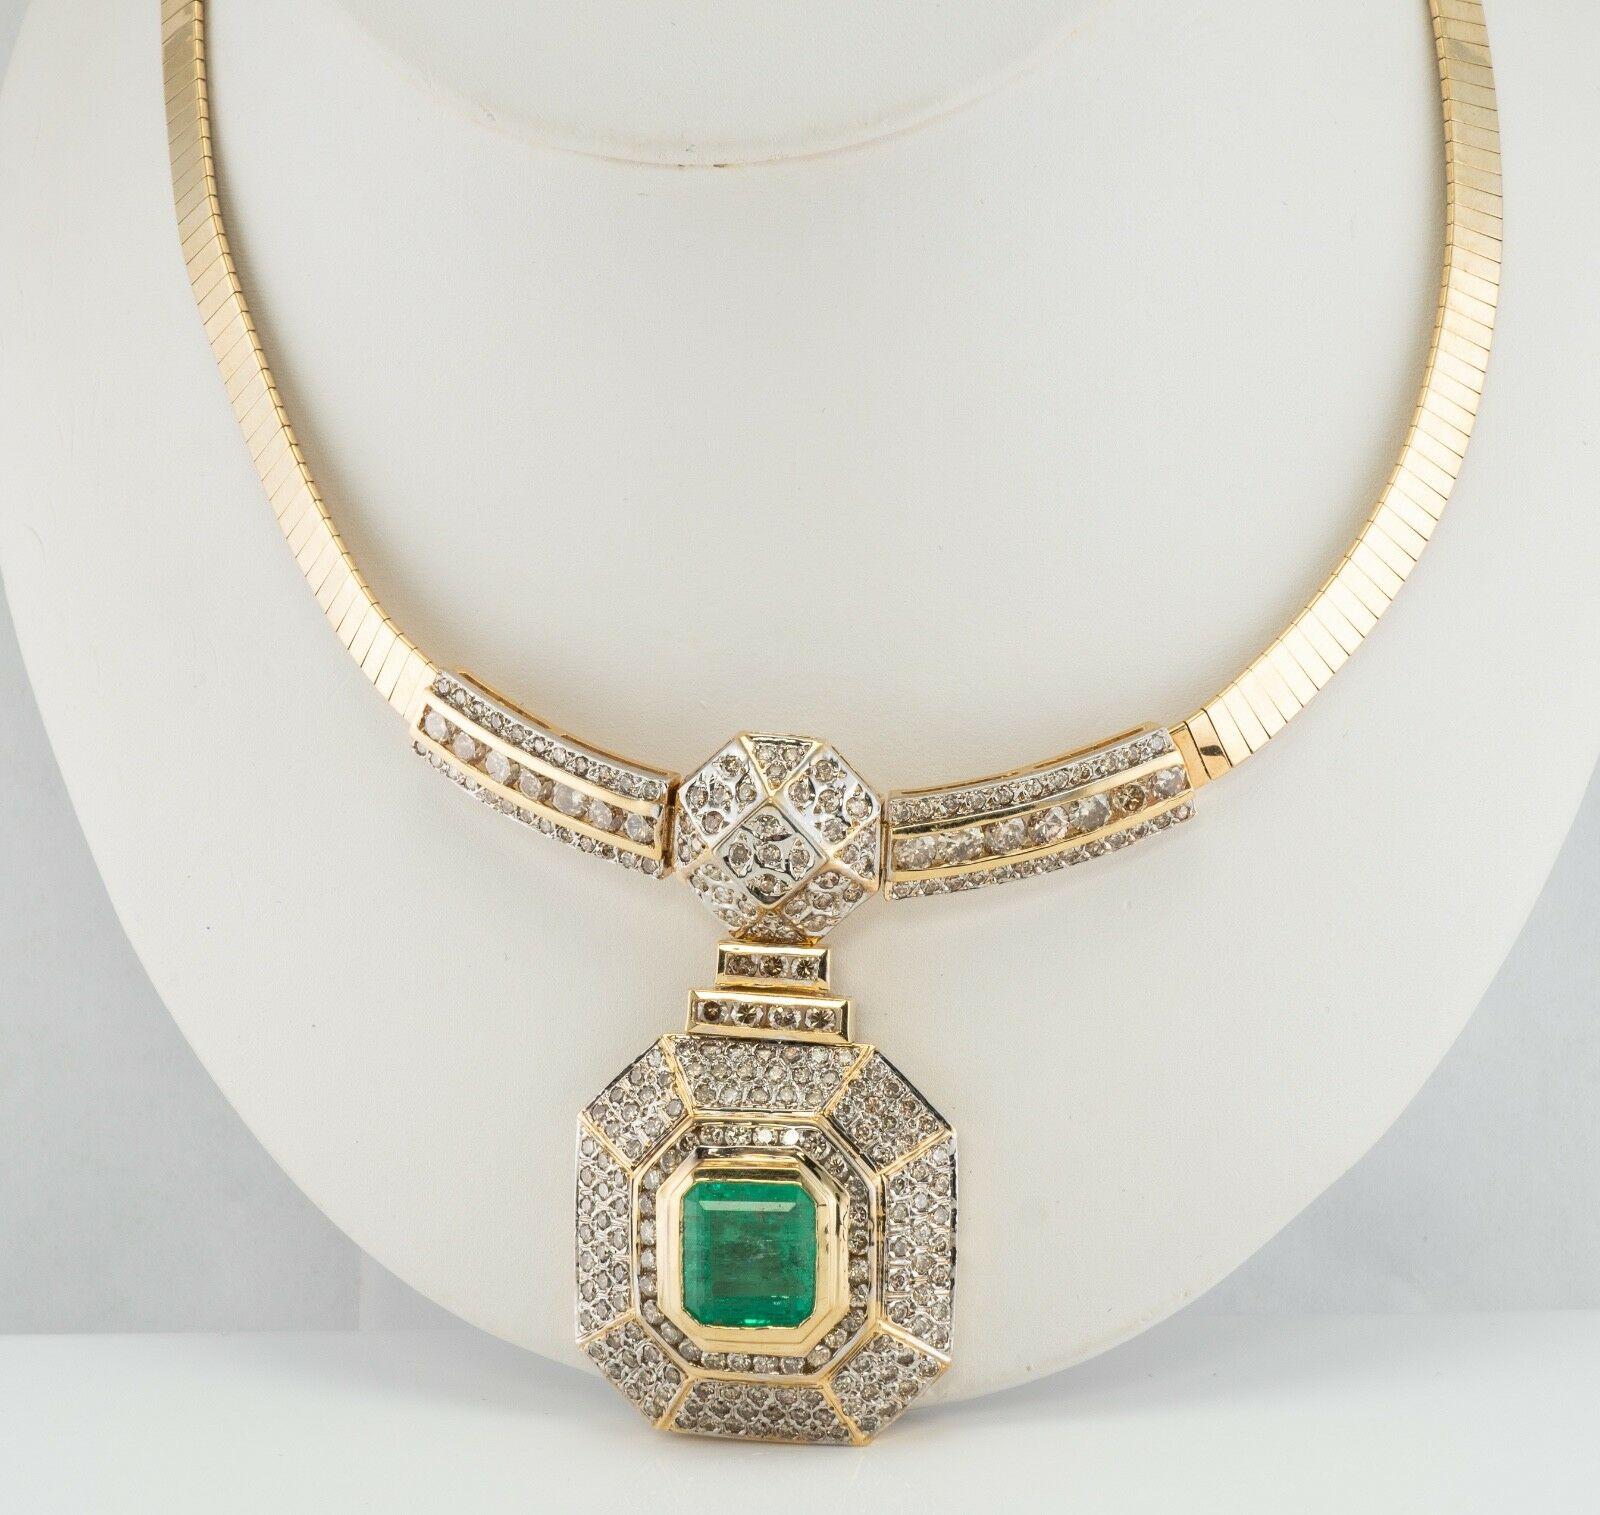 This absolutely stunning necklace is finely crafted in solid 14K Yellow gold and it is made in Italy by MNC company. The center genuine Earth mined Colombian Emerald measures 12mm x 11mm and it is estimated to be 7.61 carats. This is a high-quality